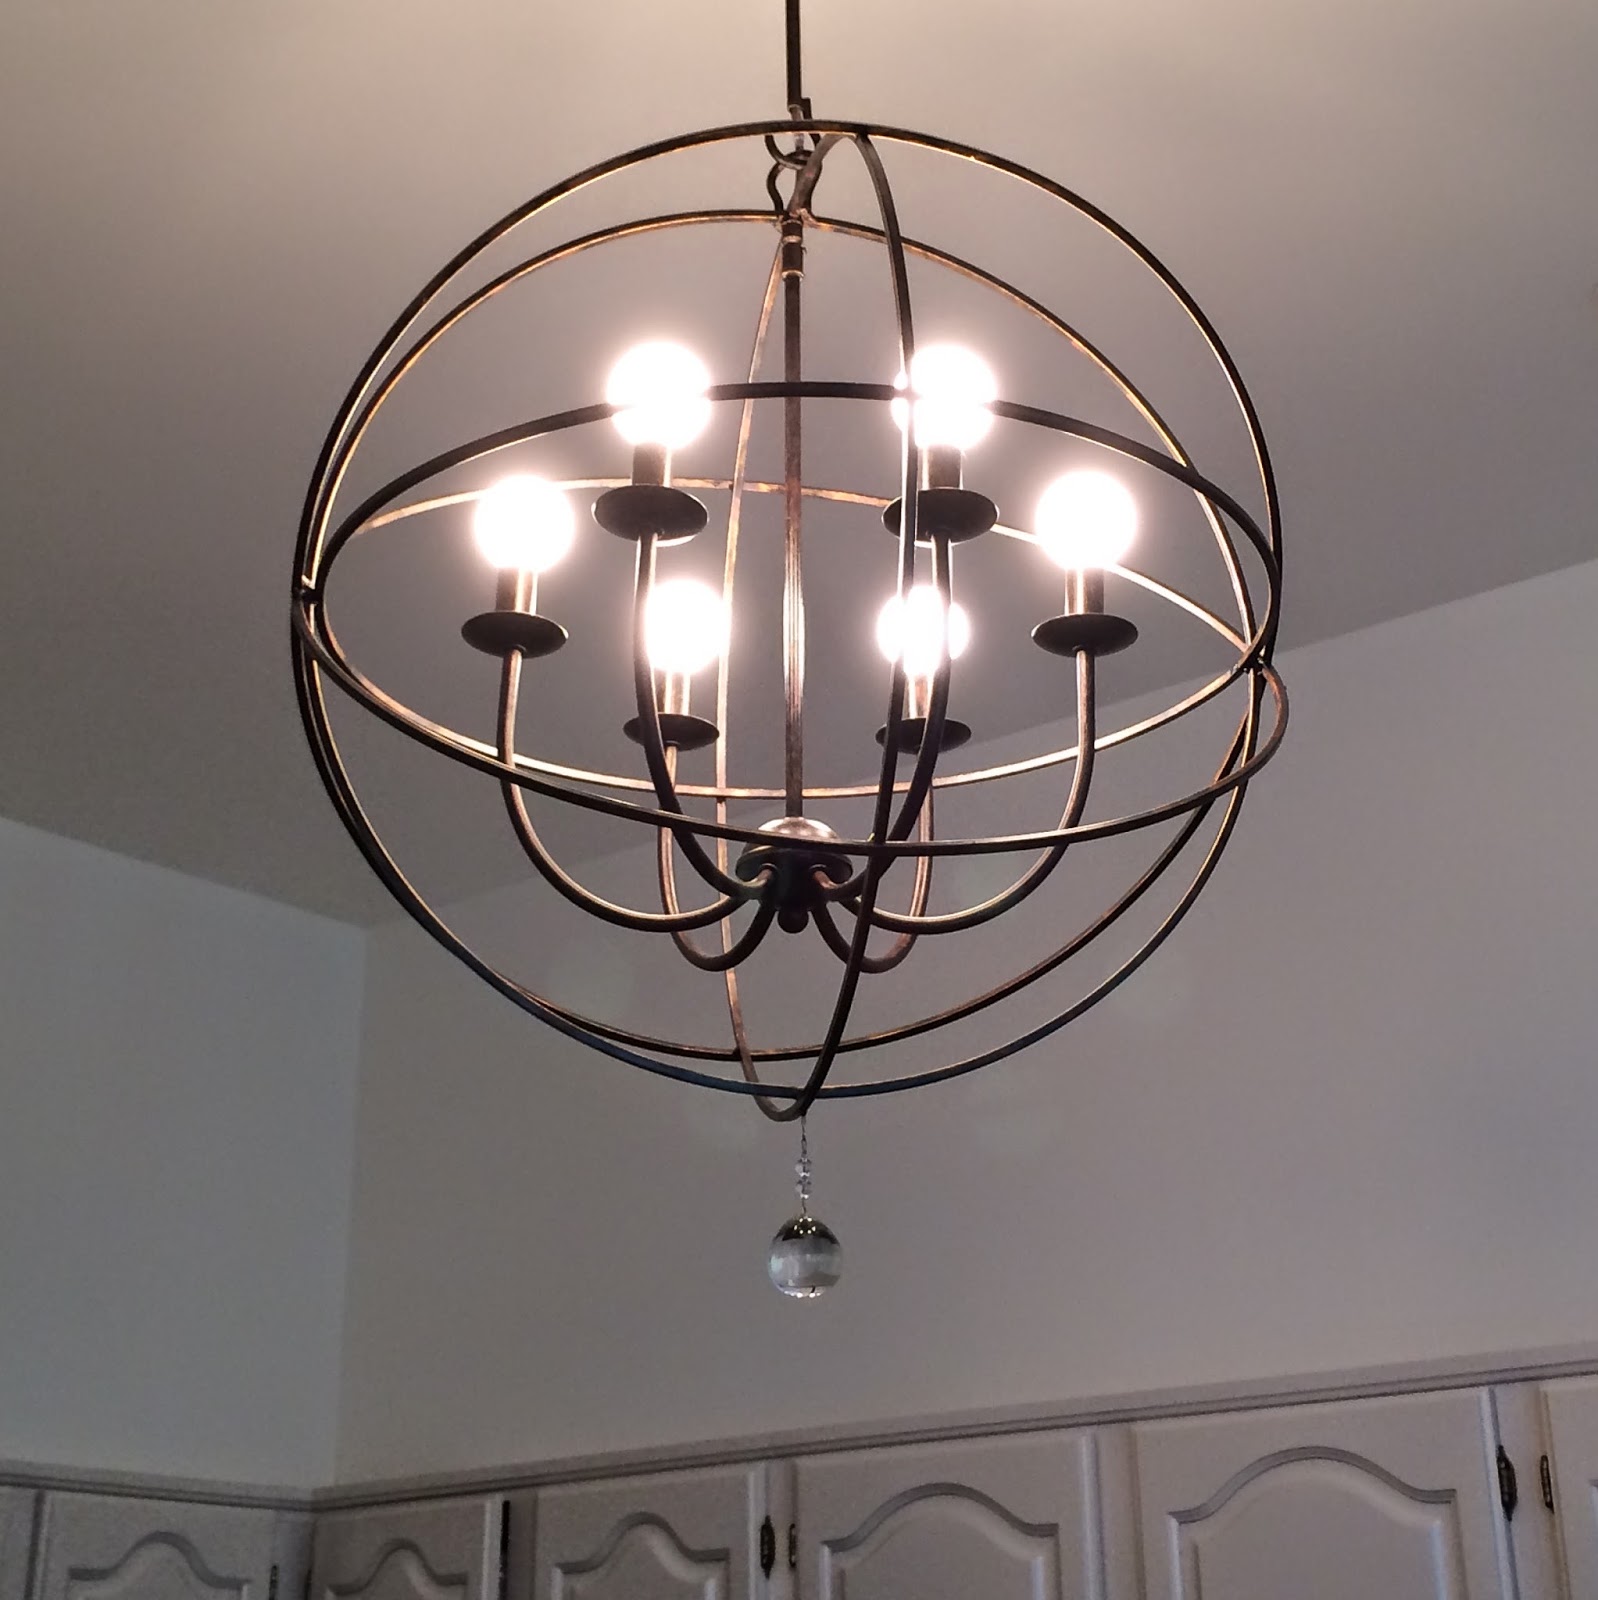 Home Depot Chandeliers at Home and Interior Design Ideas